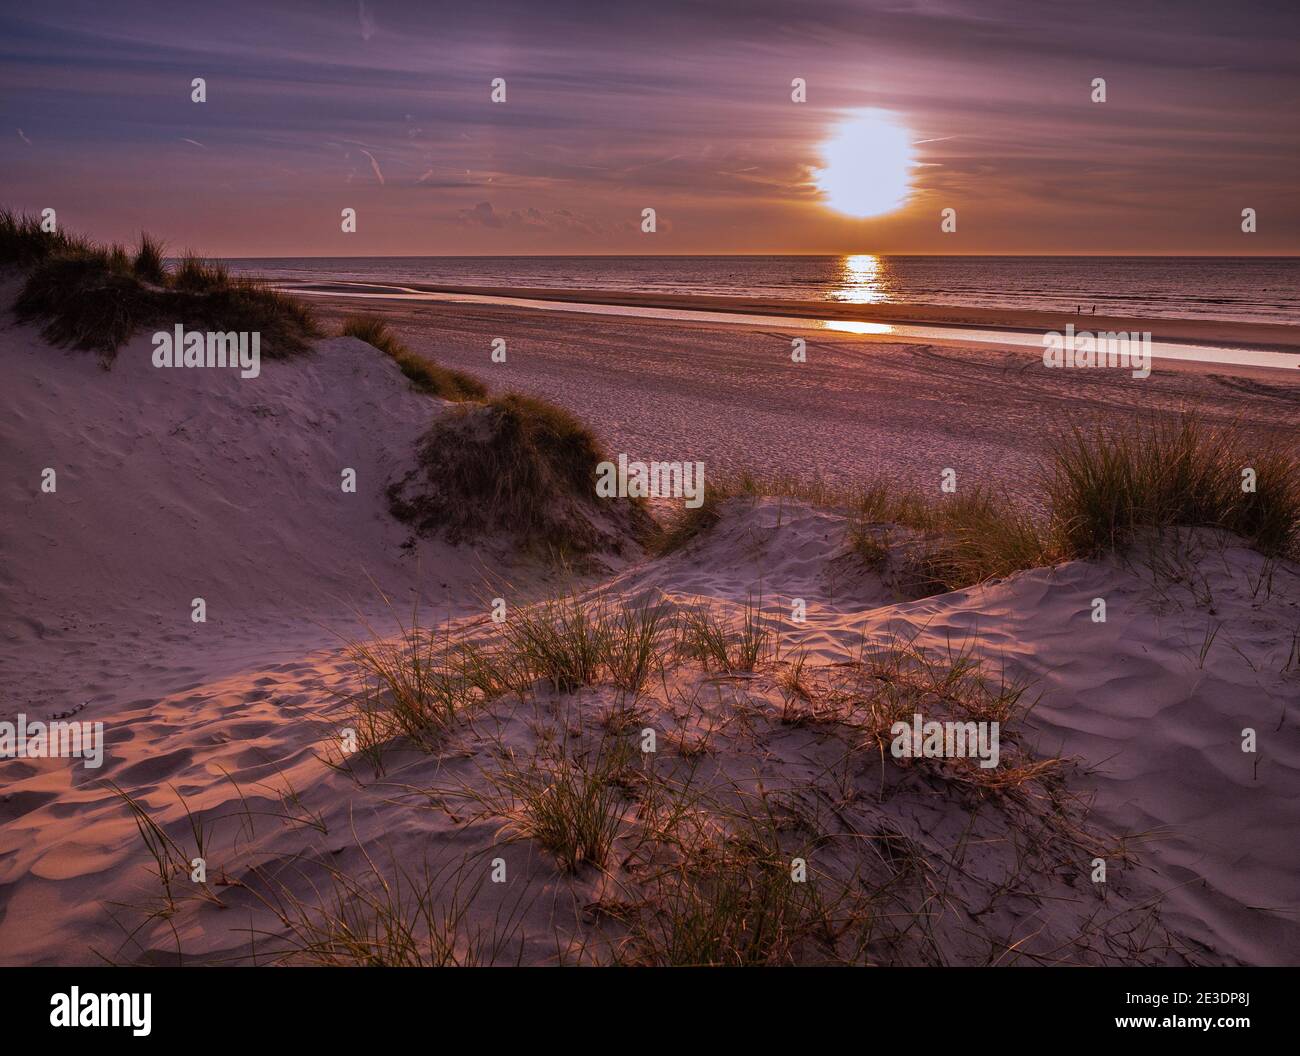 View from marram grass covered dunes towards the beach prior to a colorful sunset Stock Photo